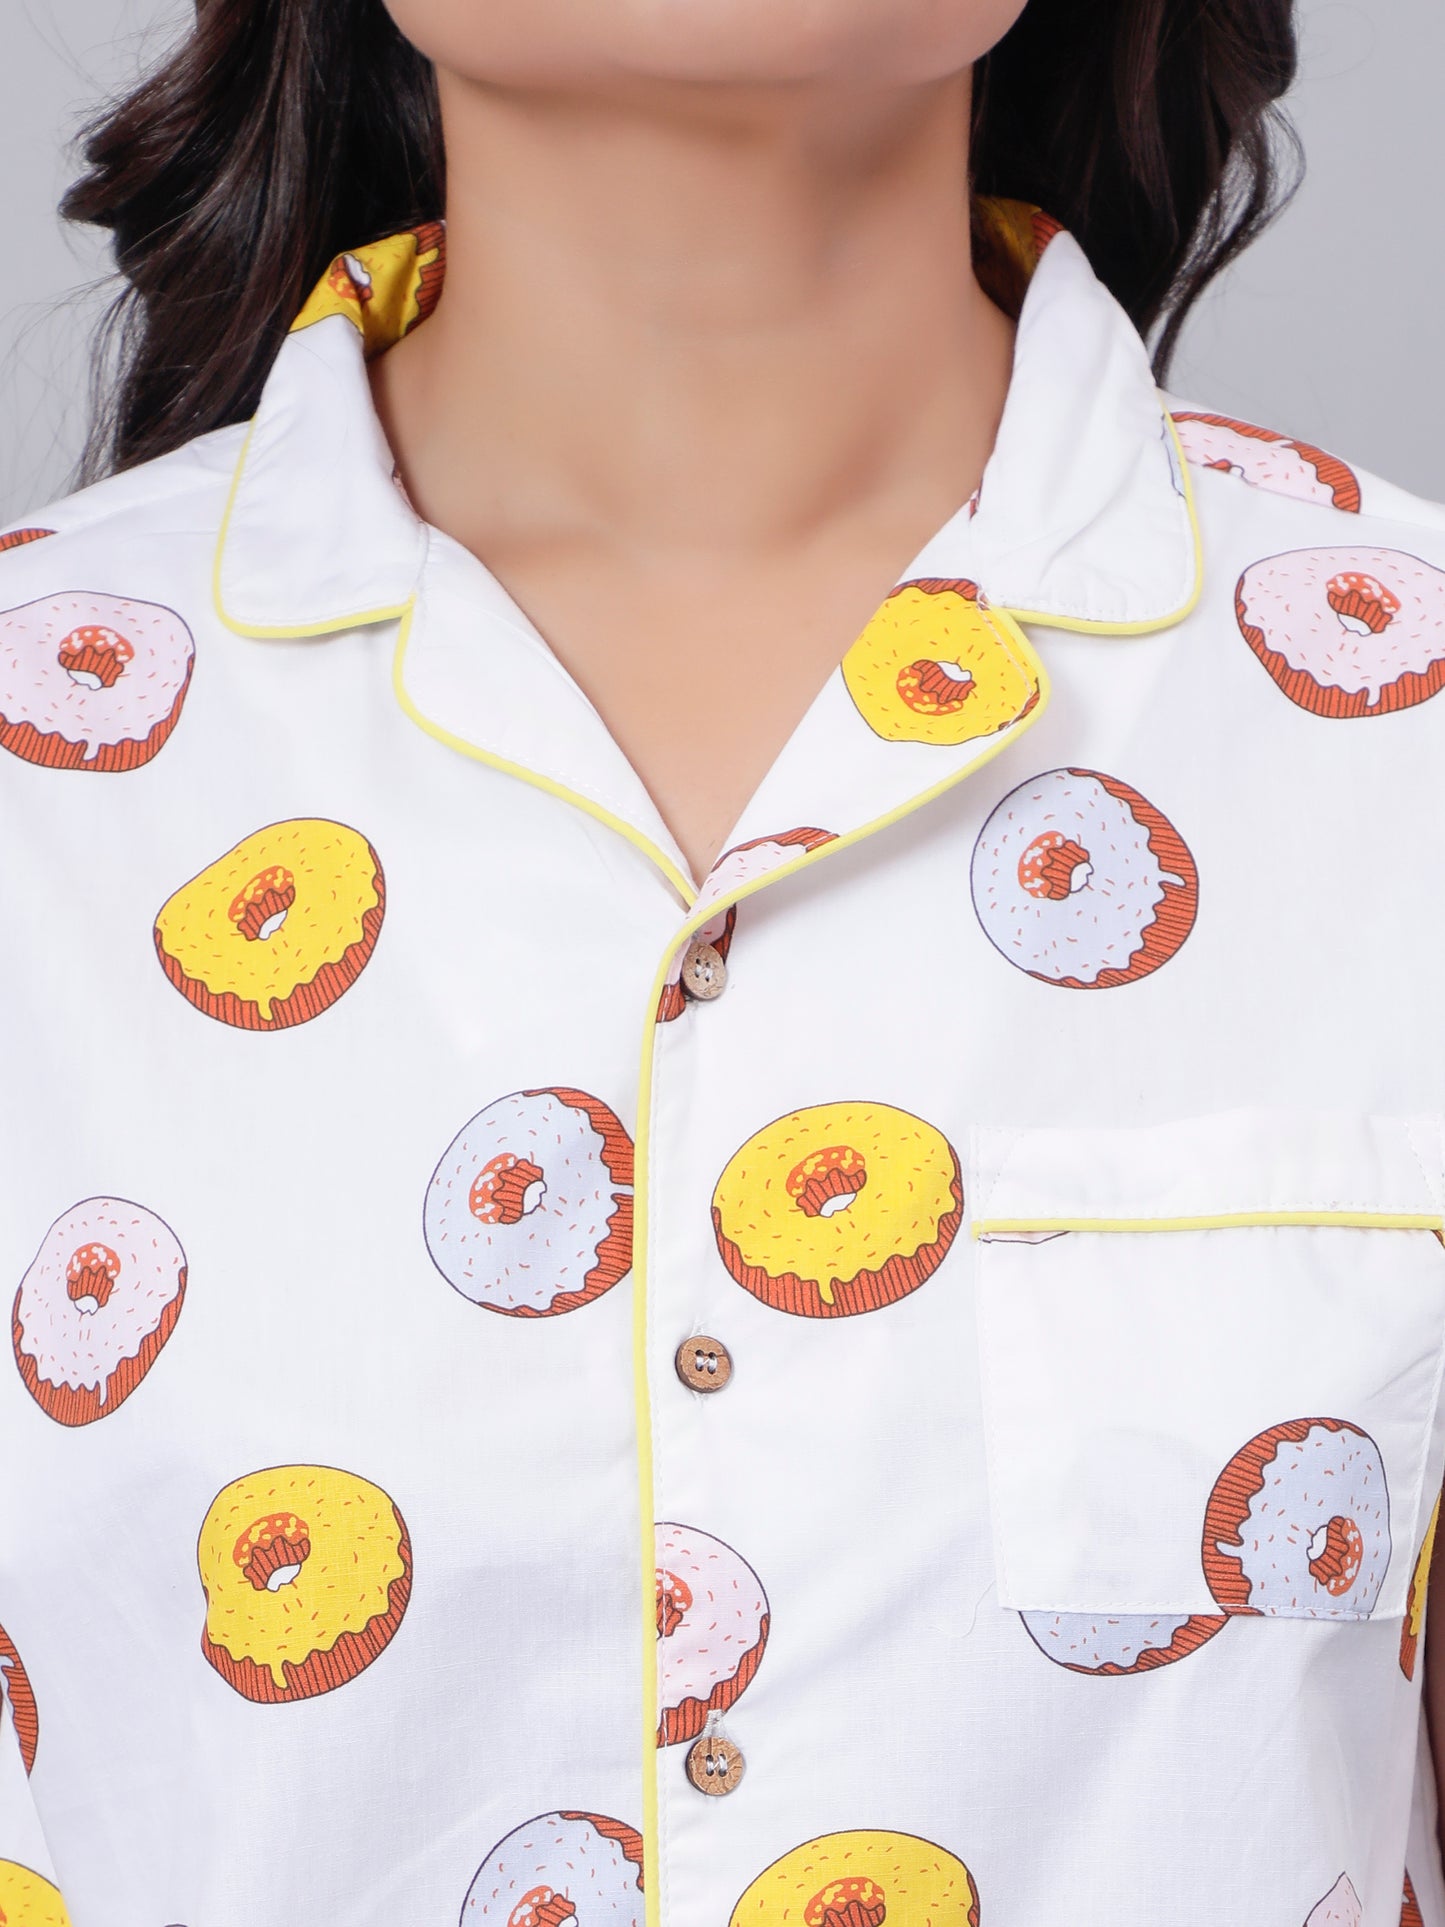 Notched Unisex nightsuit in Fun Donut Print- White